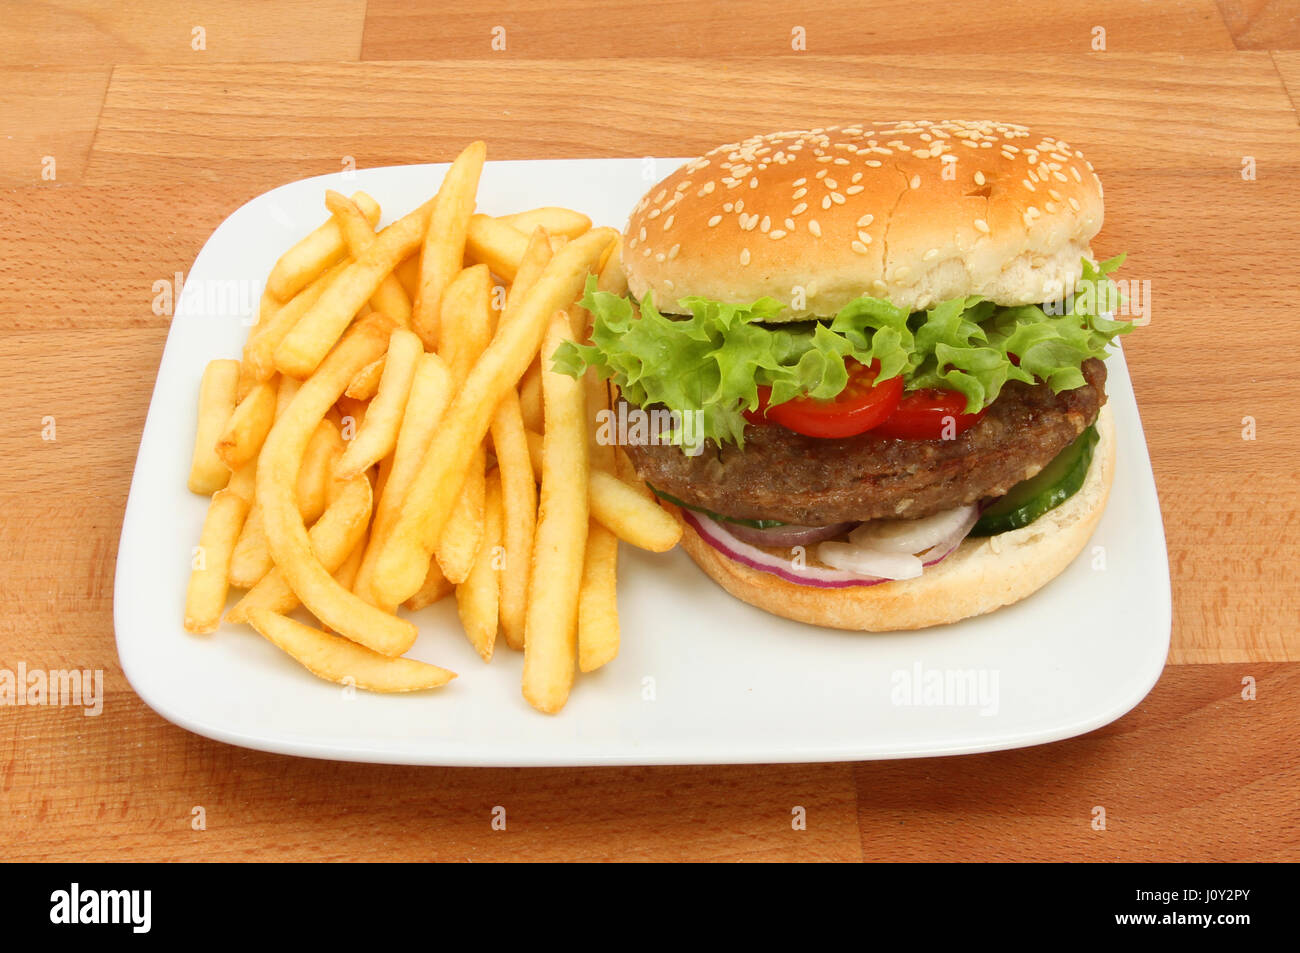 Beefburger with French fries on a plate on a wooden tabletop Stock Photo